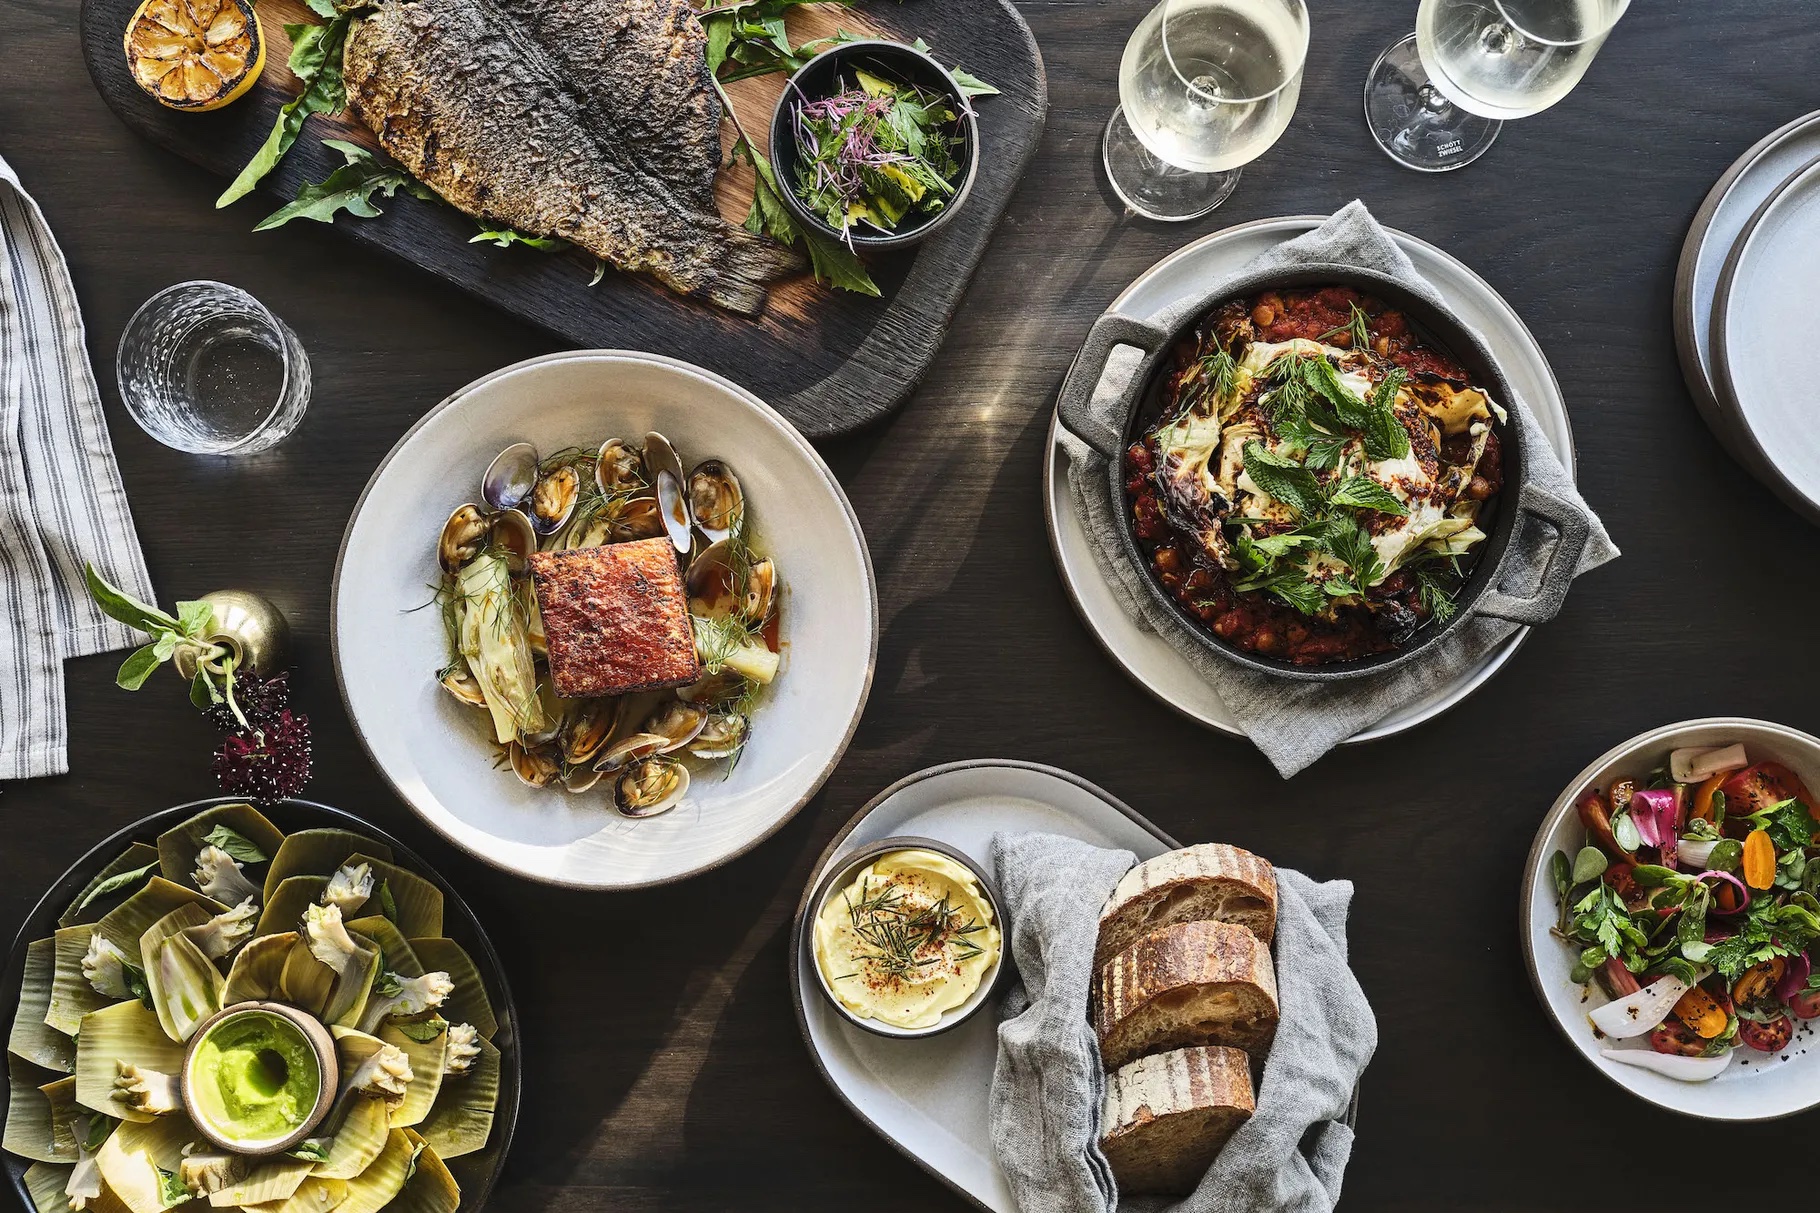 A top-down shot of plates of wood-fired food, bread, and a whole fish.